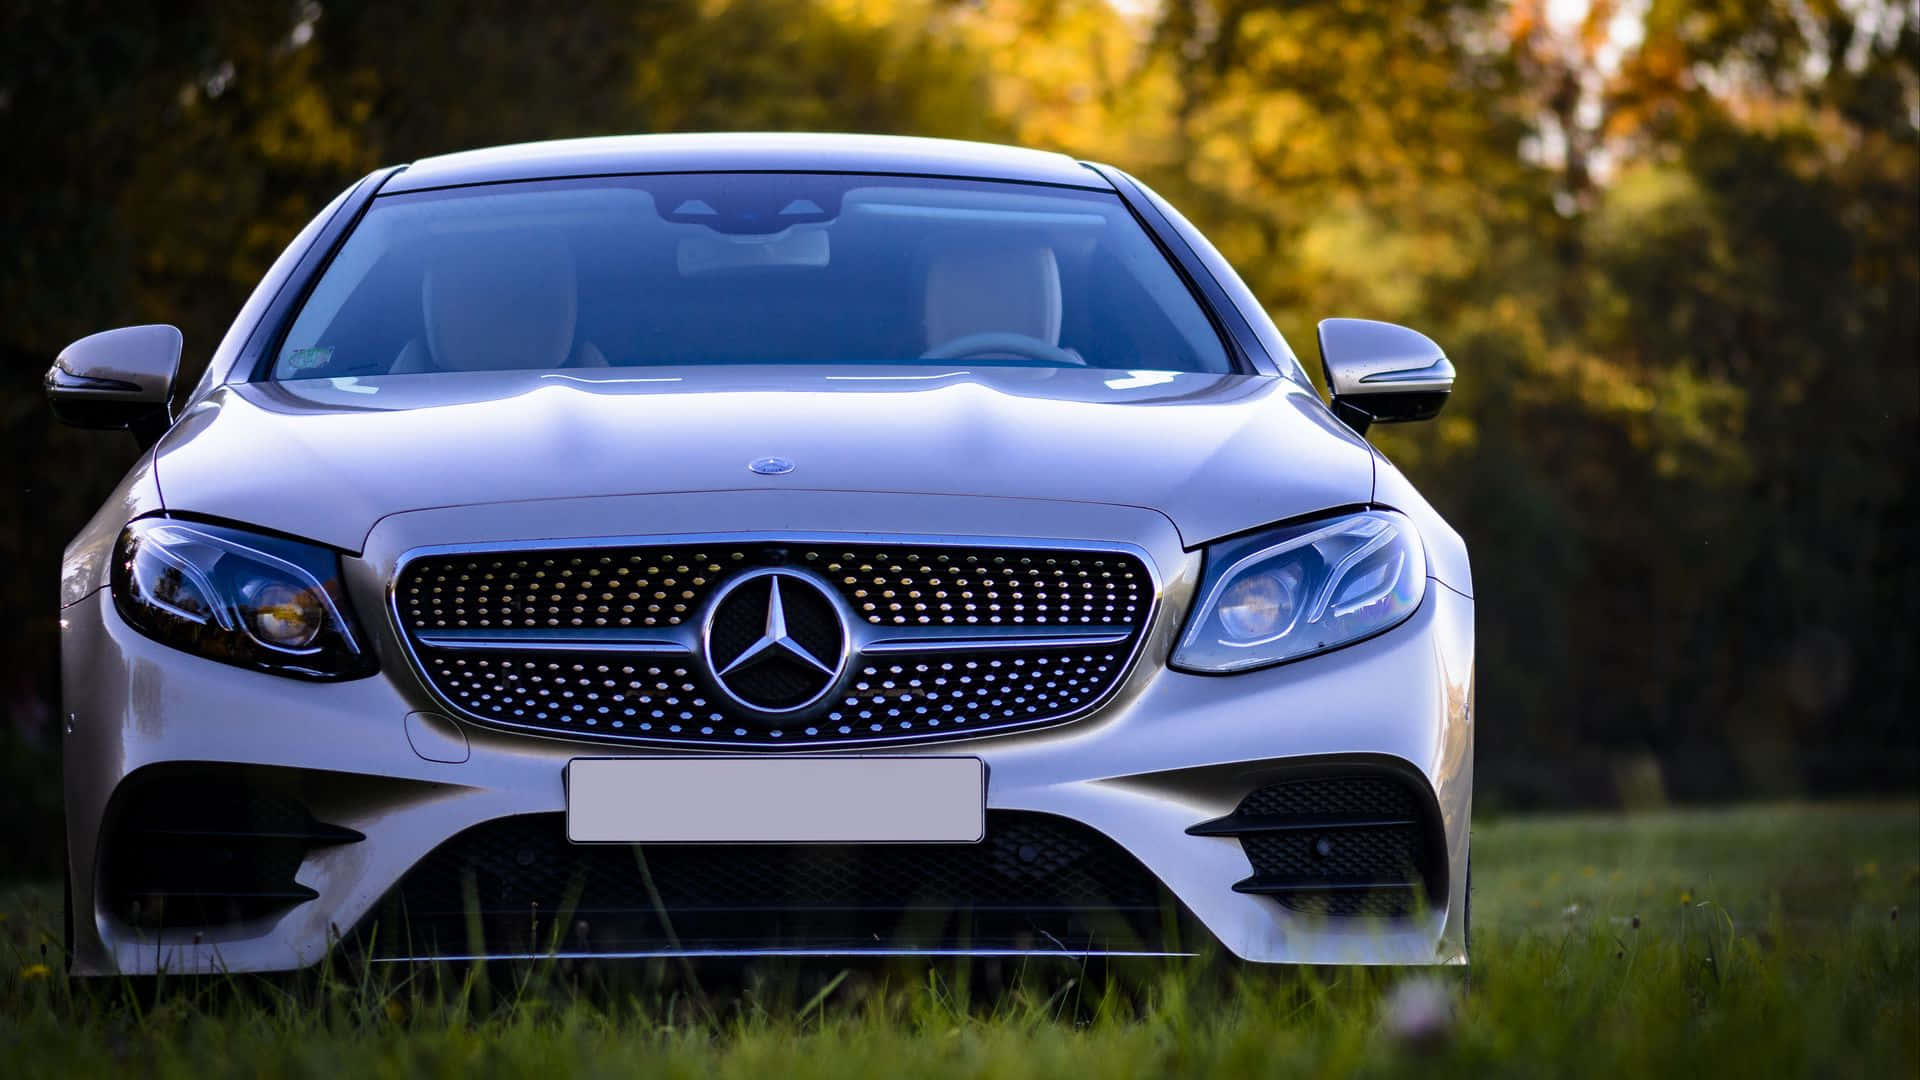 Get behind the wheel of luxury with a Mercedes Benz Wallpaper